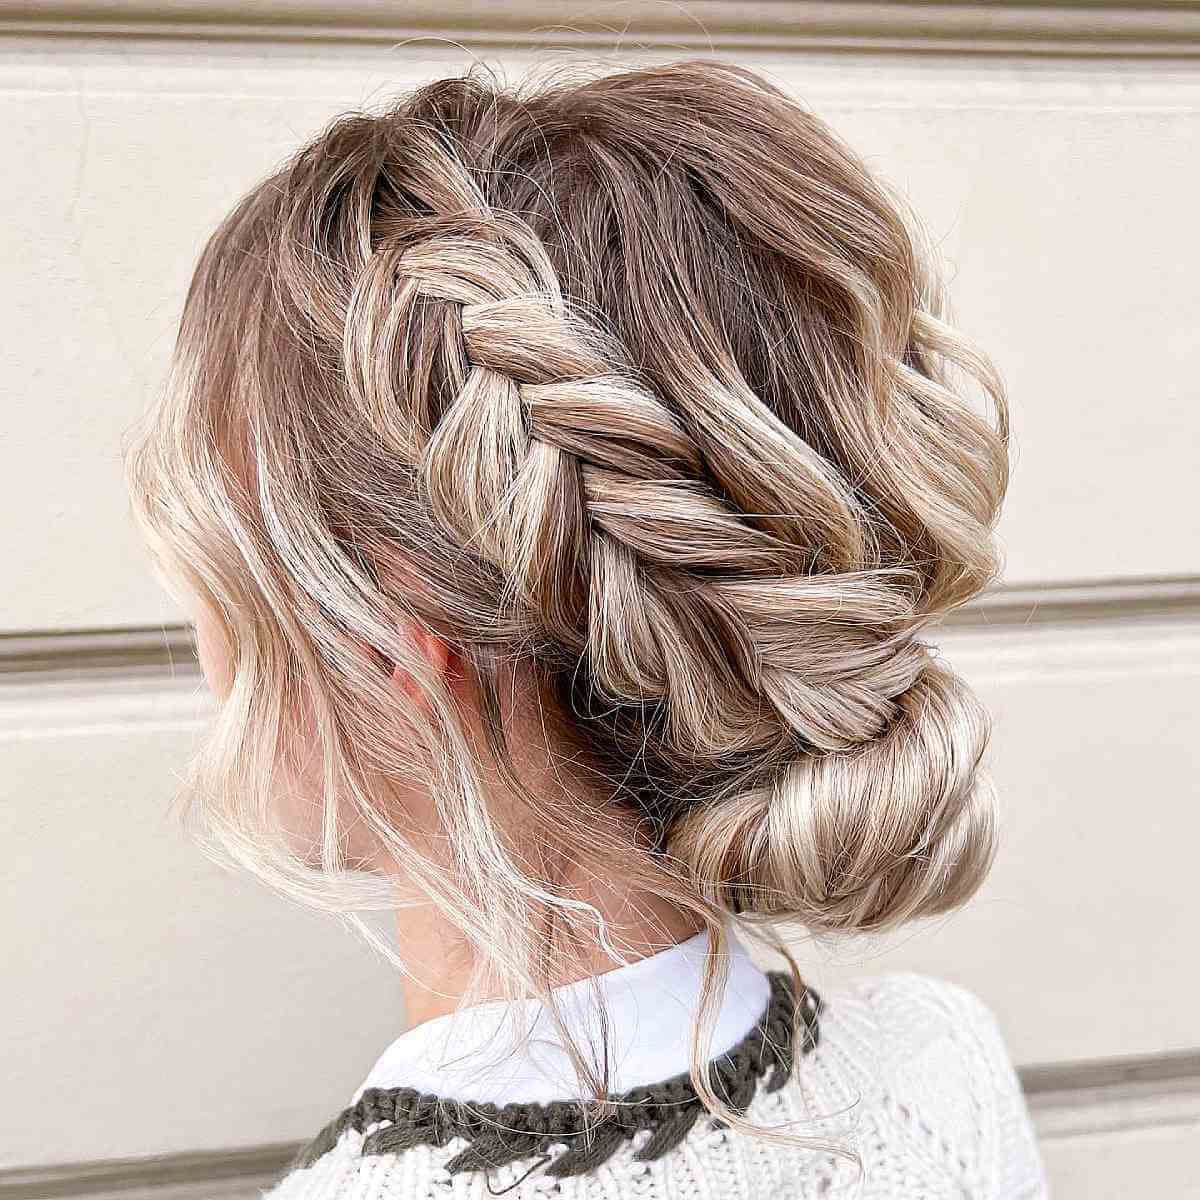 Loose French Braids